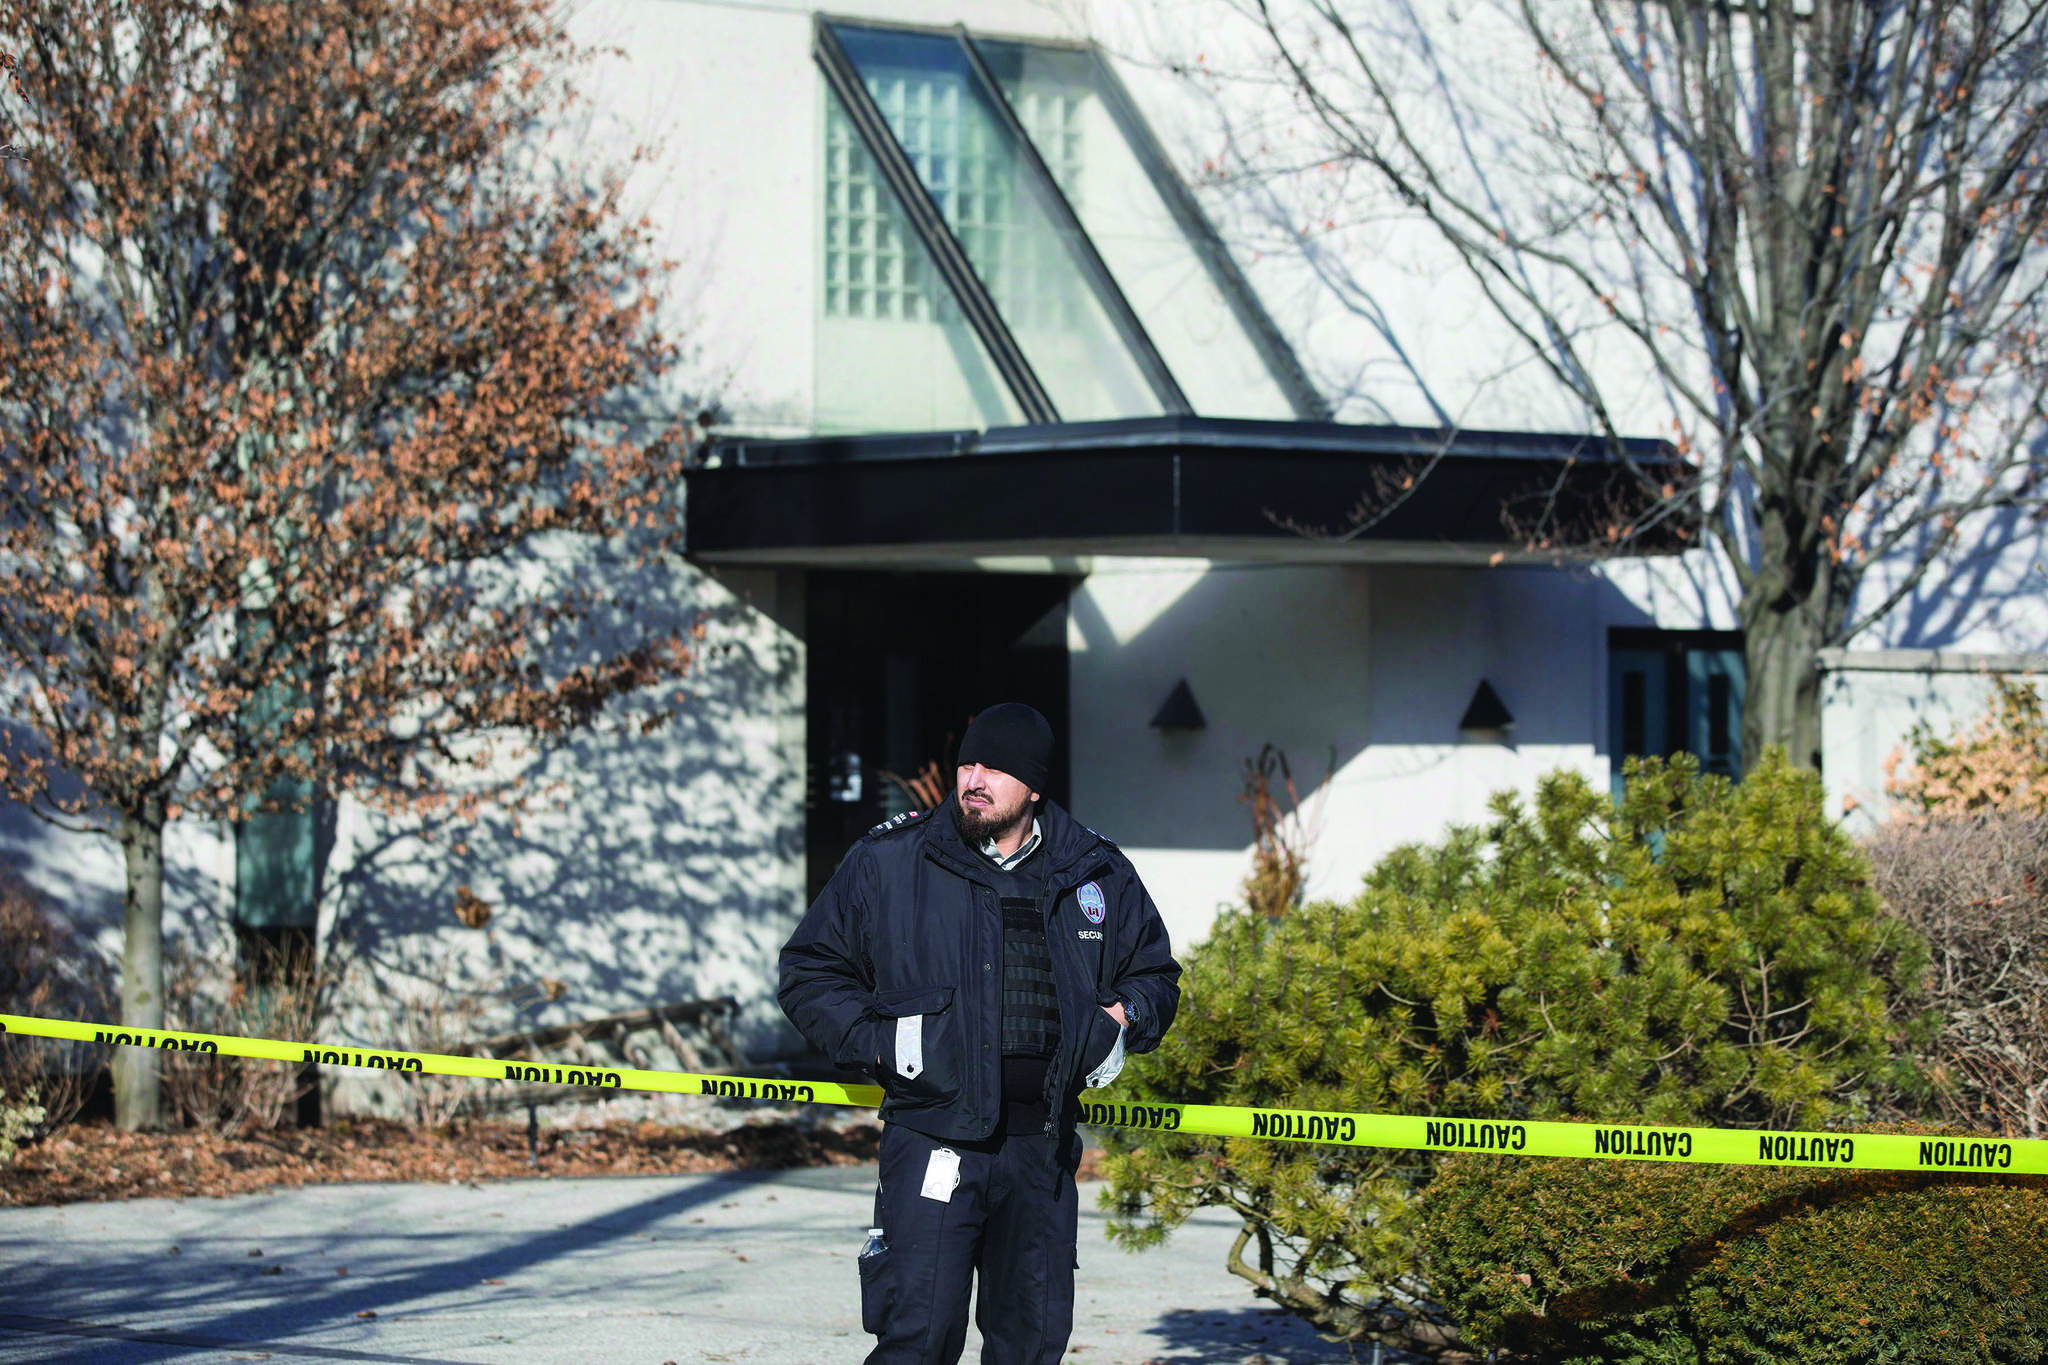 A private security guard stands outside the Toronto home of Barry and Honey Sherman on Friday, January 26, 2018. Billionaire generic drug tycoon Barry Sherman and his wife Honey were victims of a targeted double killing but no suspects have been identified, Toronto police said on Friday. (Chris Young/The Canadian Press)